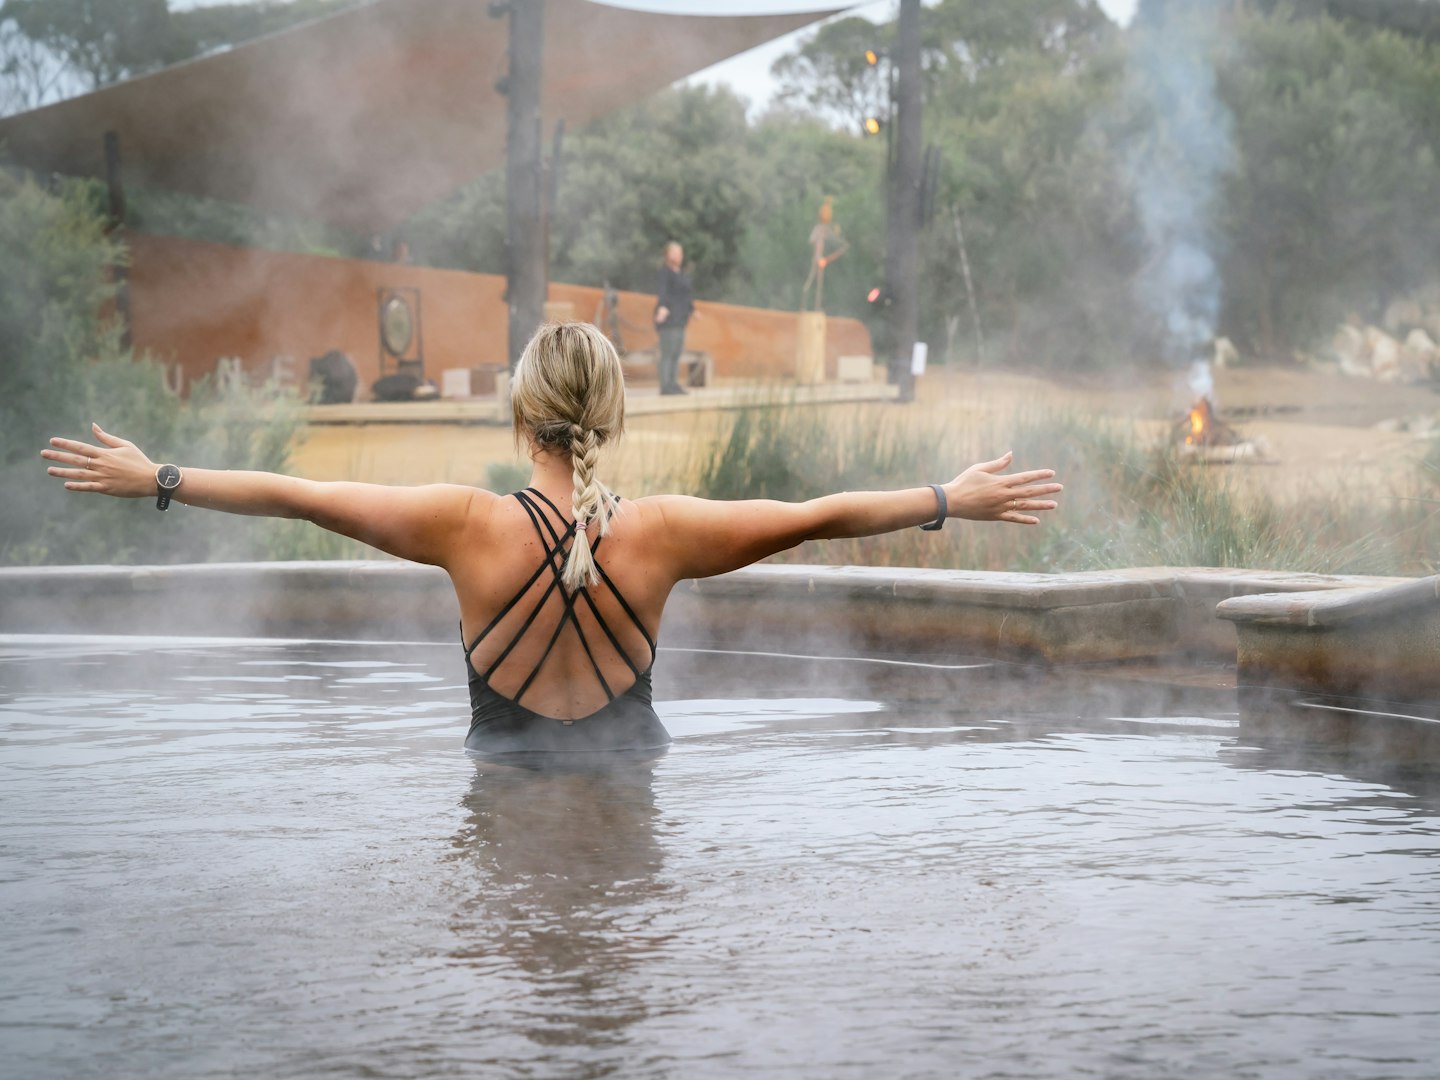 Lady in geothermal pool with arms outstretched in yoga pose